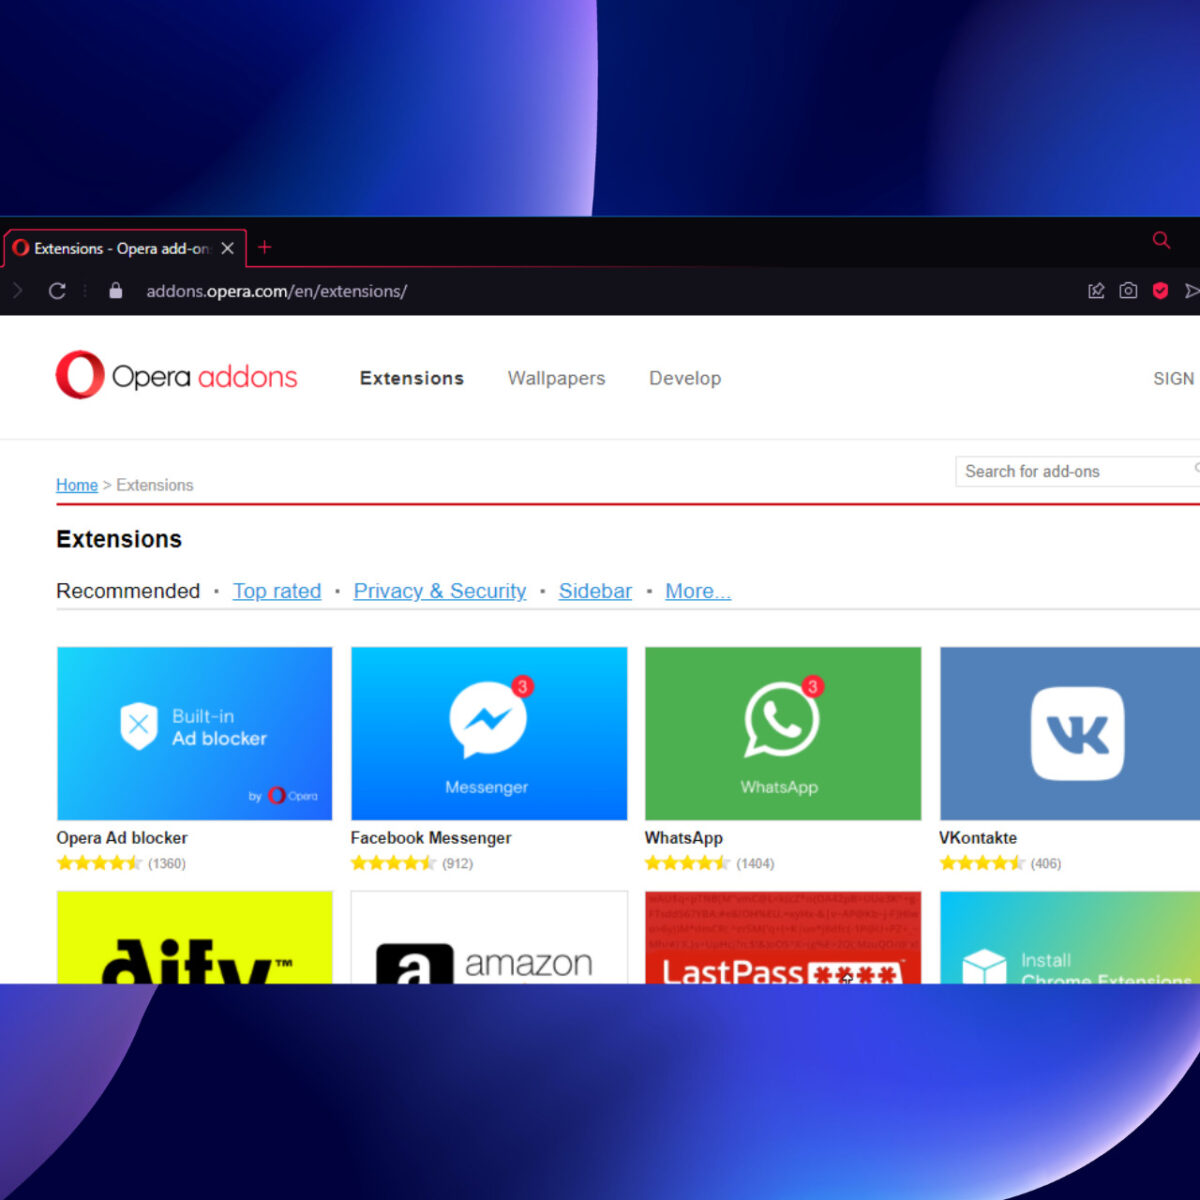 Downloader extension - Opera add-ons